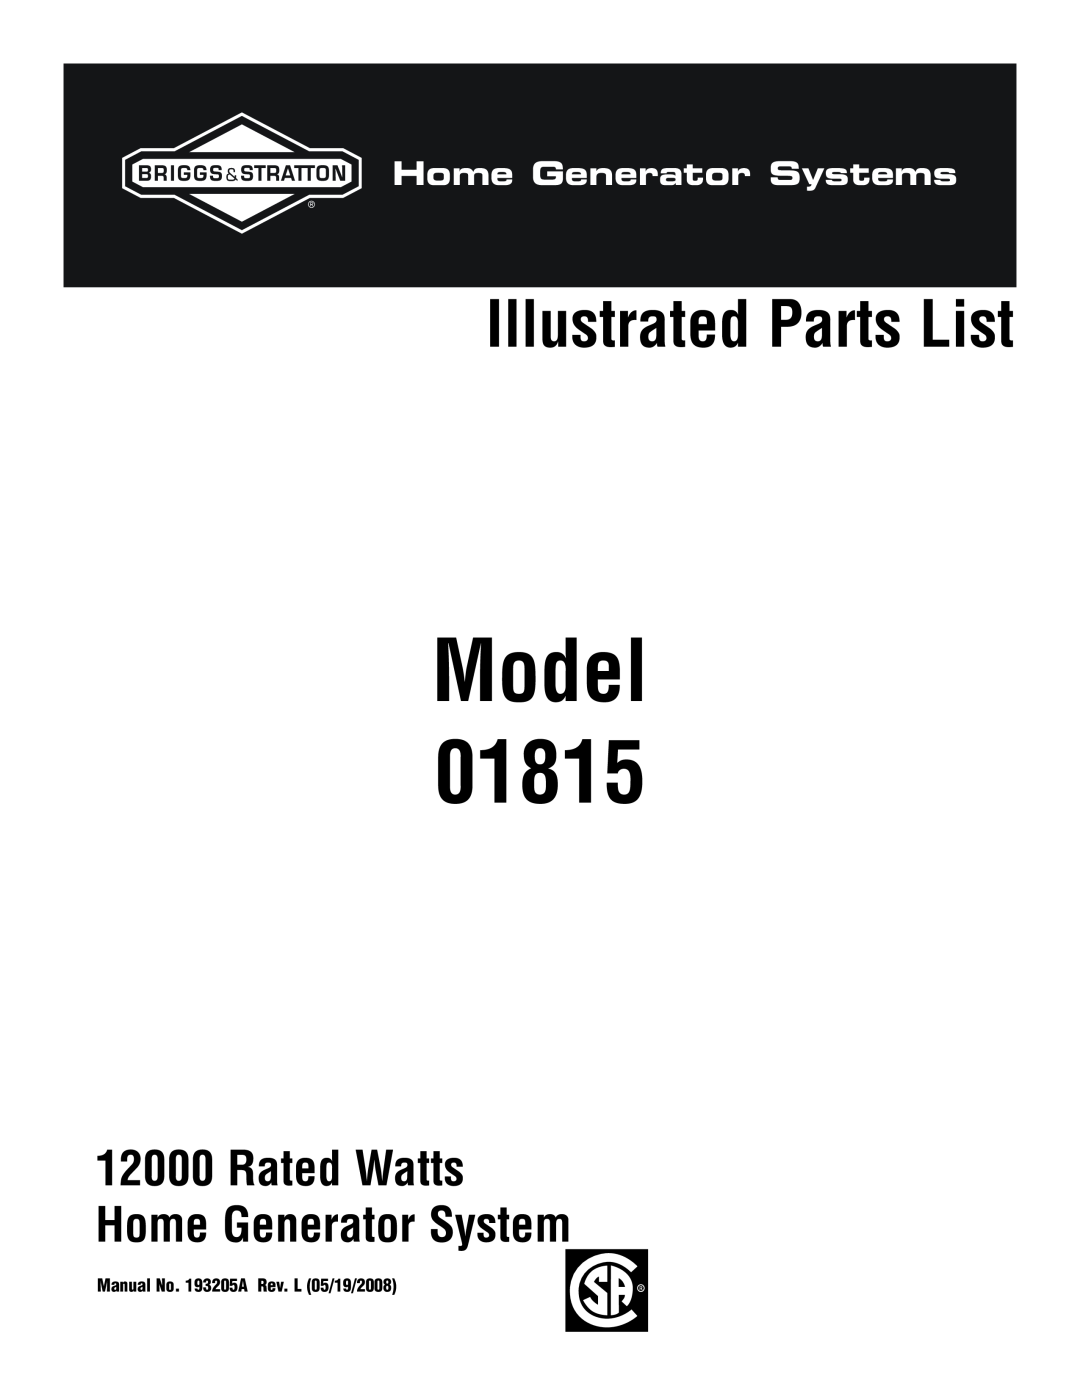 Briggs & Stratton 1815 manual Model, Illustrated Parts List, Rated Watts Home Generator System, Home Generator Systems 